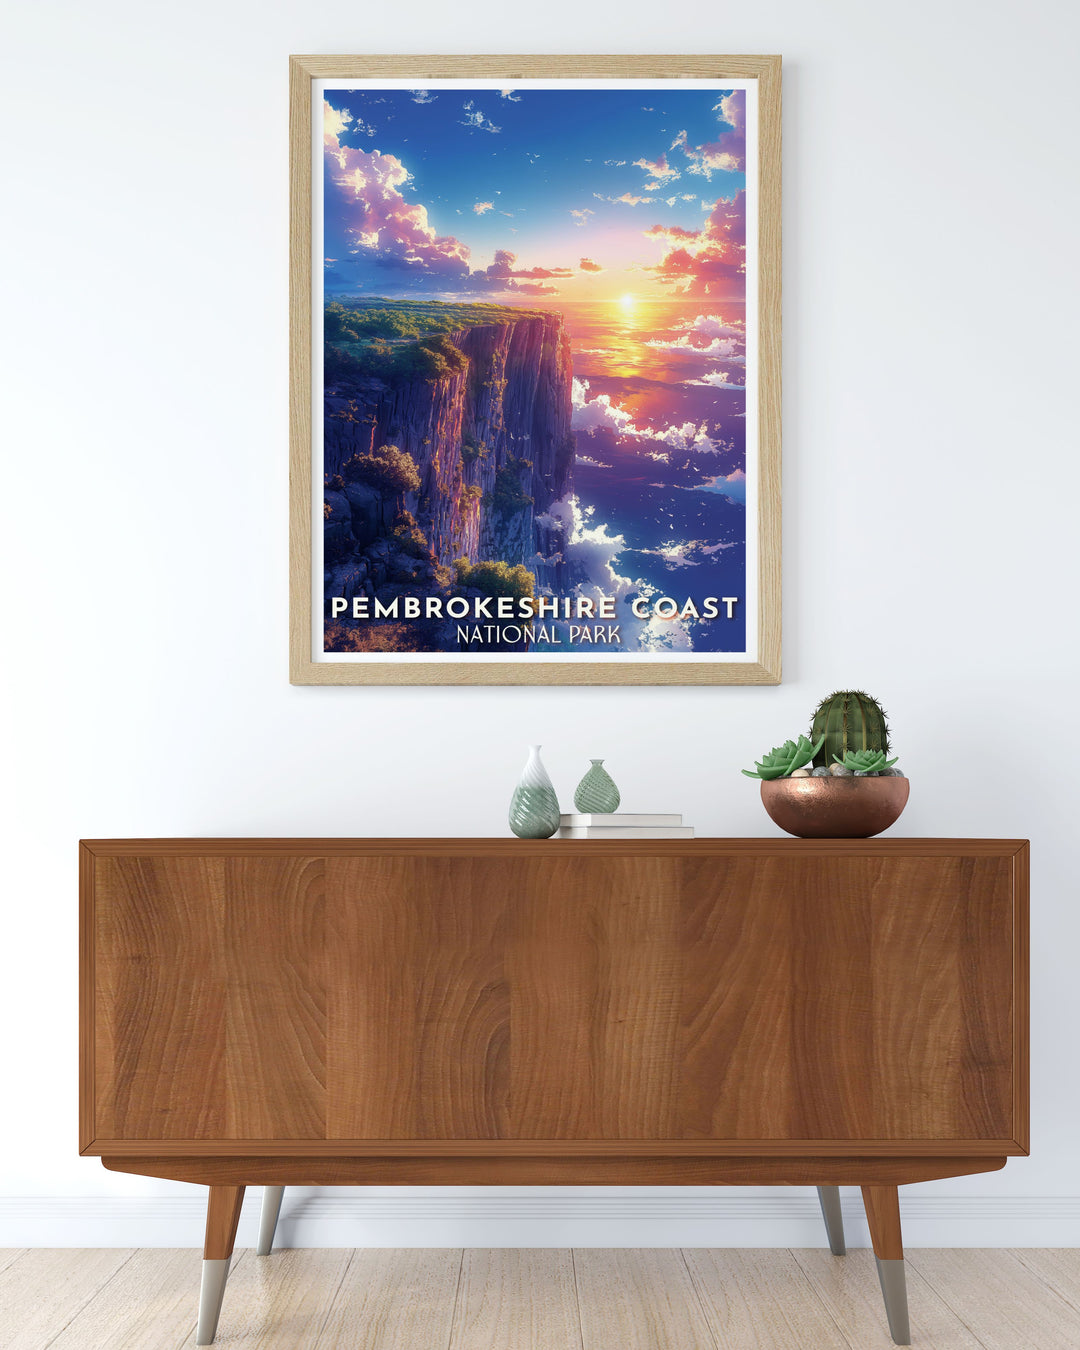 Discover the serene landscapes of Pembrokeshire Coast National Park through this exquisite travel poster, capturing the diverse ecosystems and natural beauty of this iconic destination.